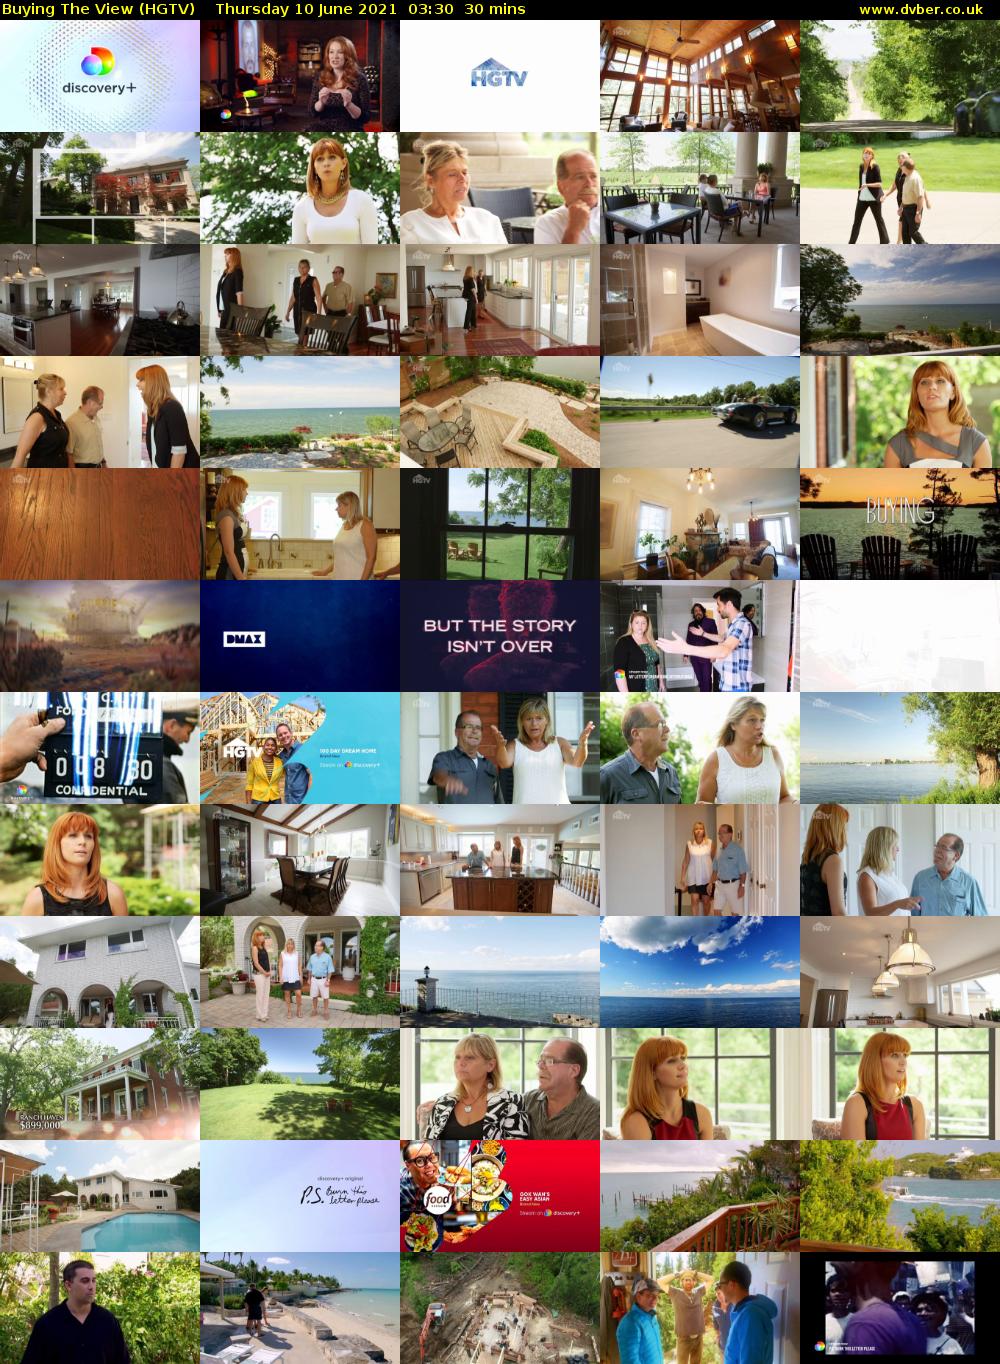 Buying The View (HGTV) Thursday 10 June 2021 03:30 - 04:00